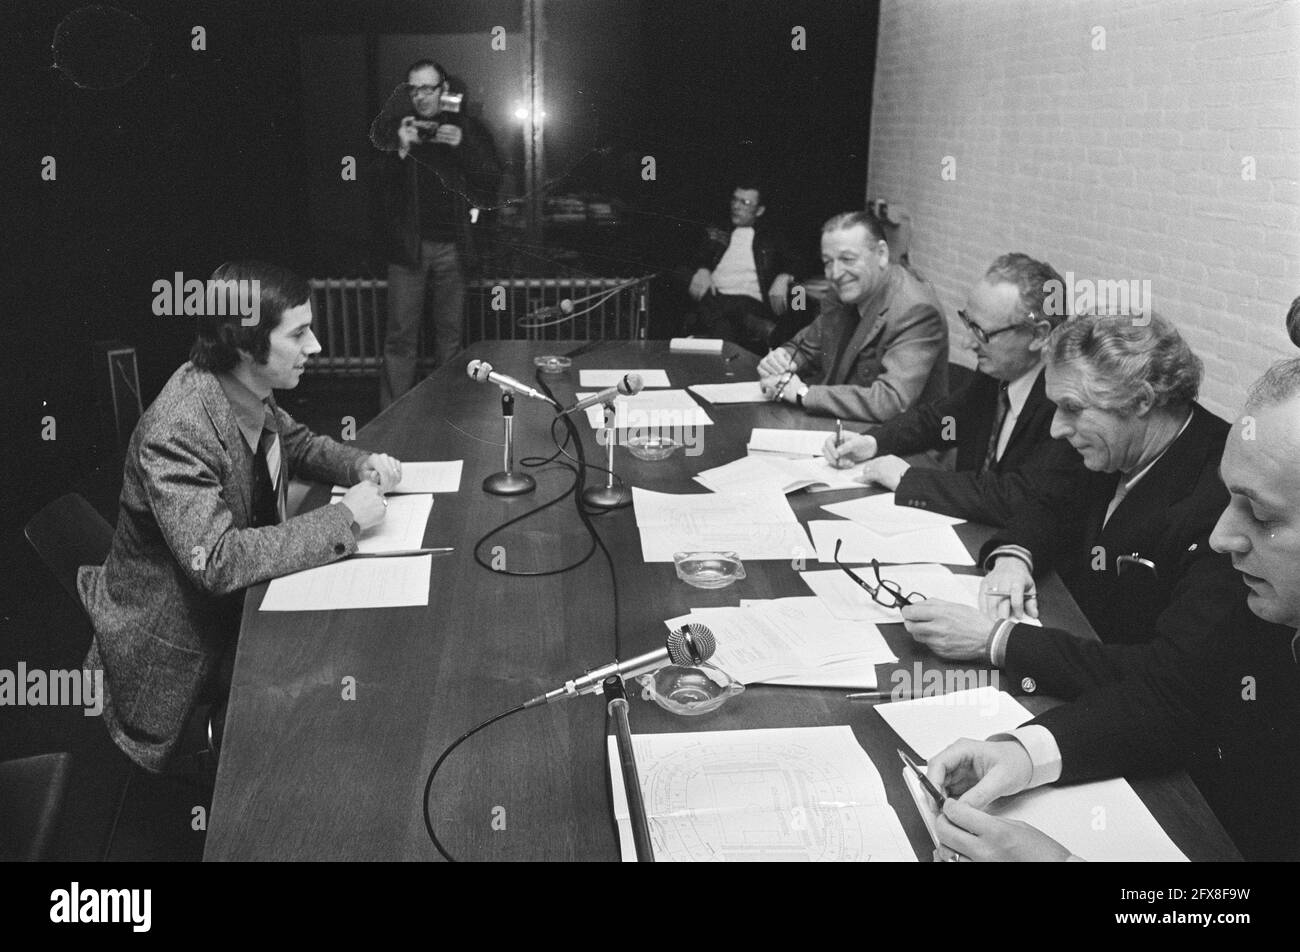 Handling disciplinary committee of the KNVB in the case Quaars v. Griek (linesman); Quaars before the disciplinary committee, December 29, 1975, case law, soccer, The Netherlands, 20th century press agency photo, news to remember, documentary, historic photography 1945-1990, visual stories, human history of the Twentieth Century, capturing moments in time Stock Photo